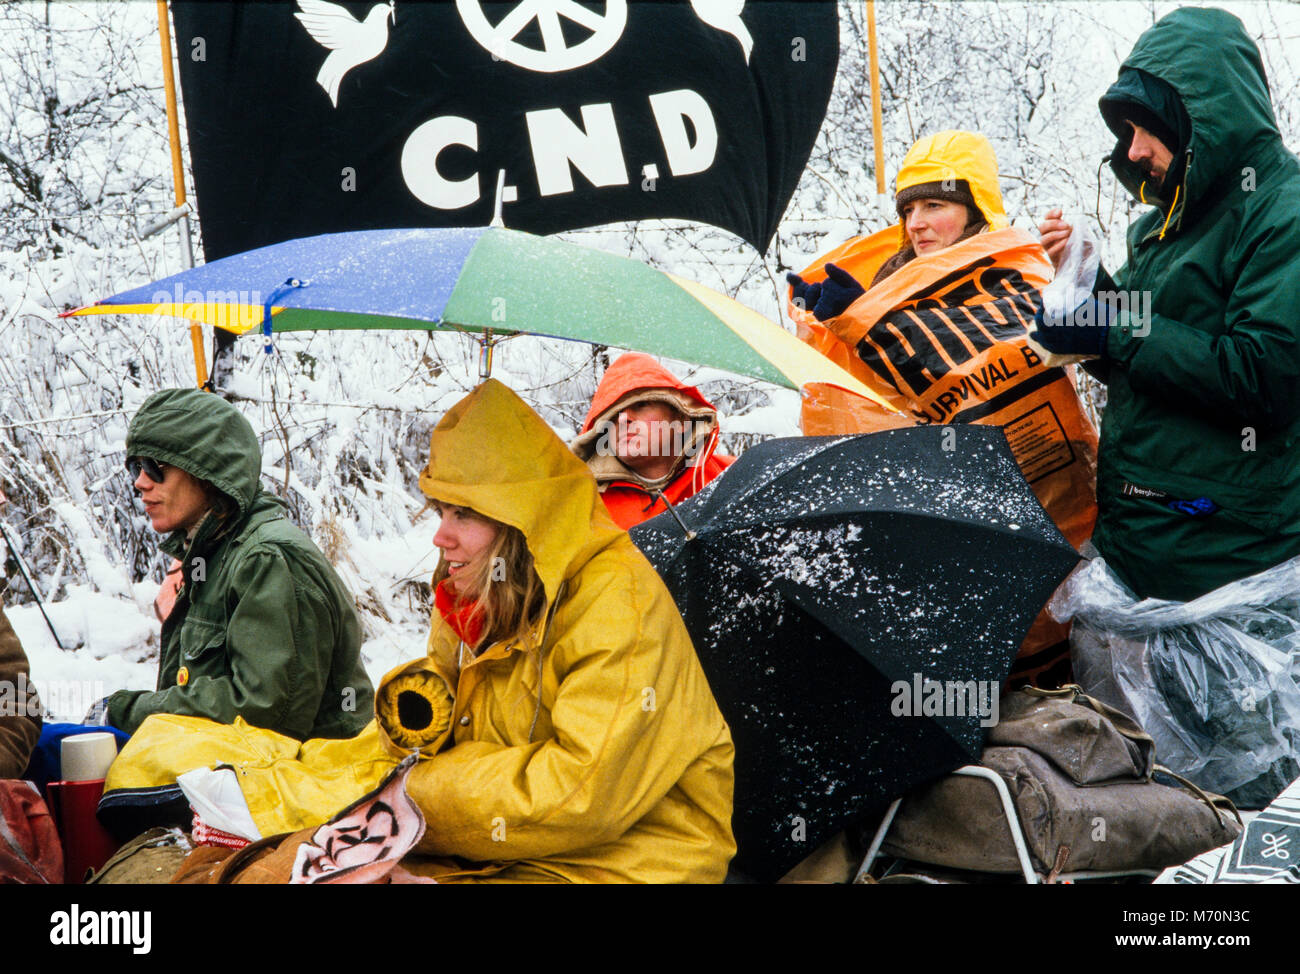 Protesters sitting in the snow at the Anti cruise missile demonstration at the Molesworth missile base on 2nd February 1986 in snowy conditions. Cambridgeshire, England, UK, archival photograph, Stock Photo